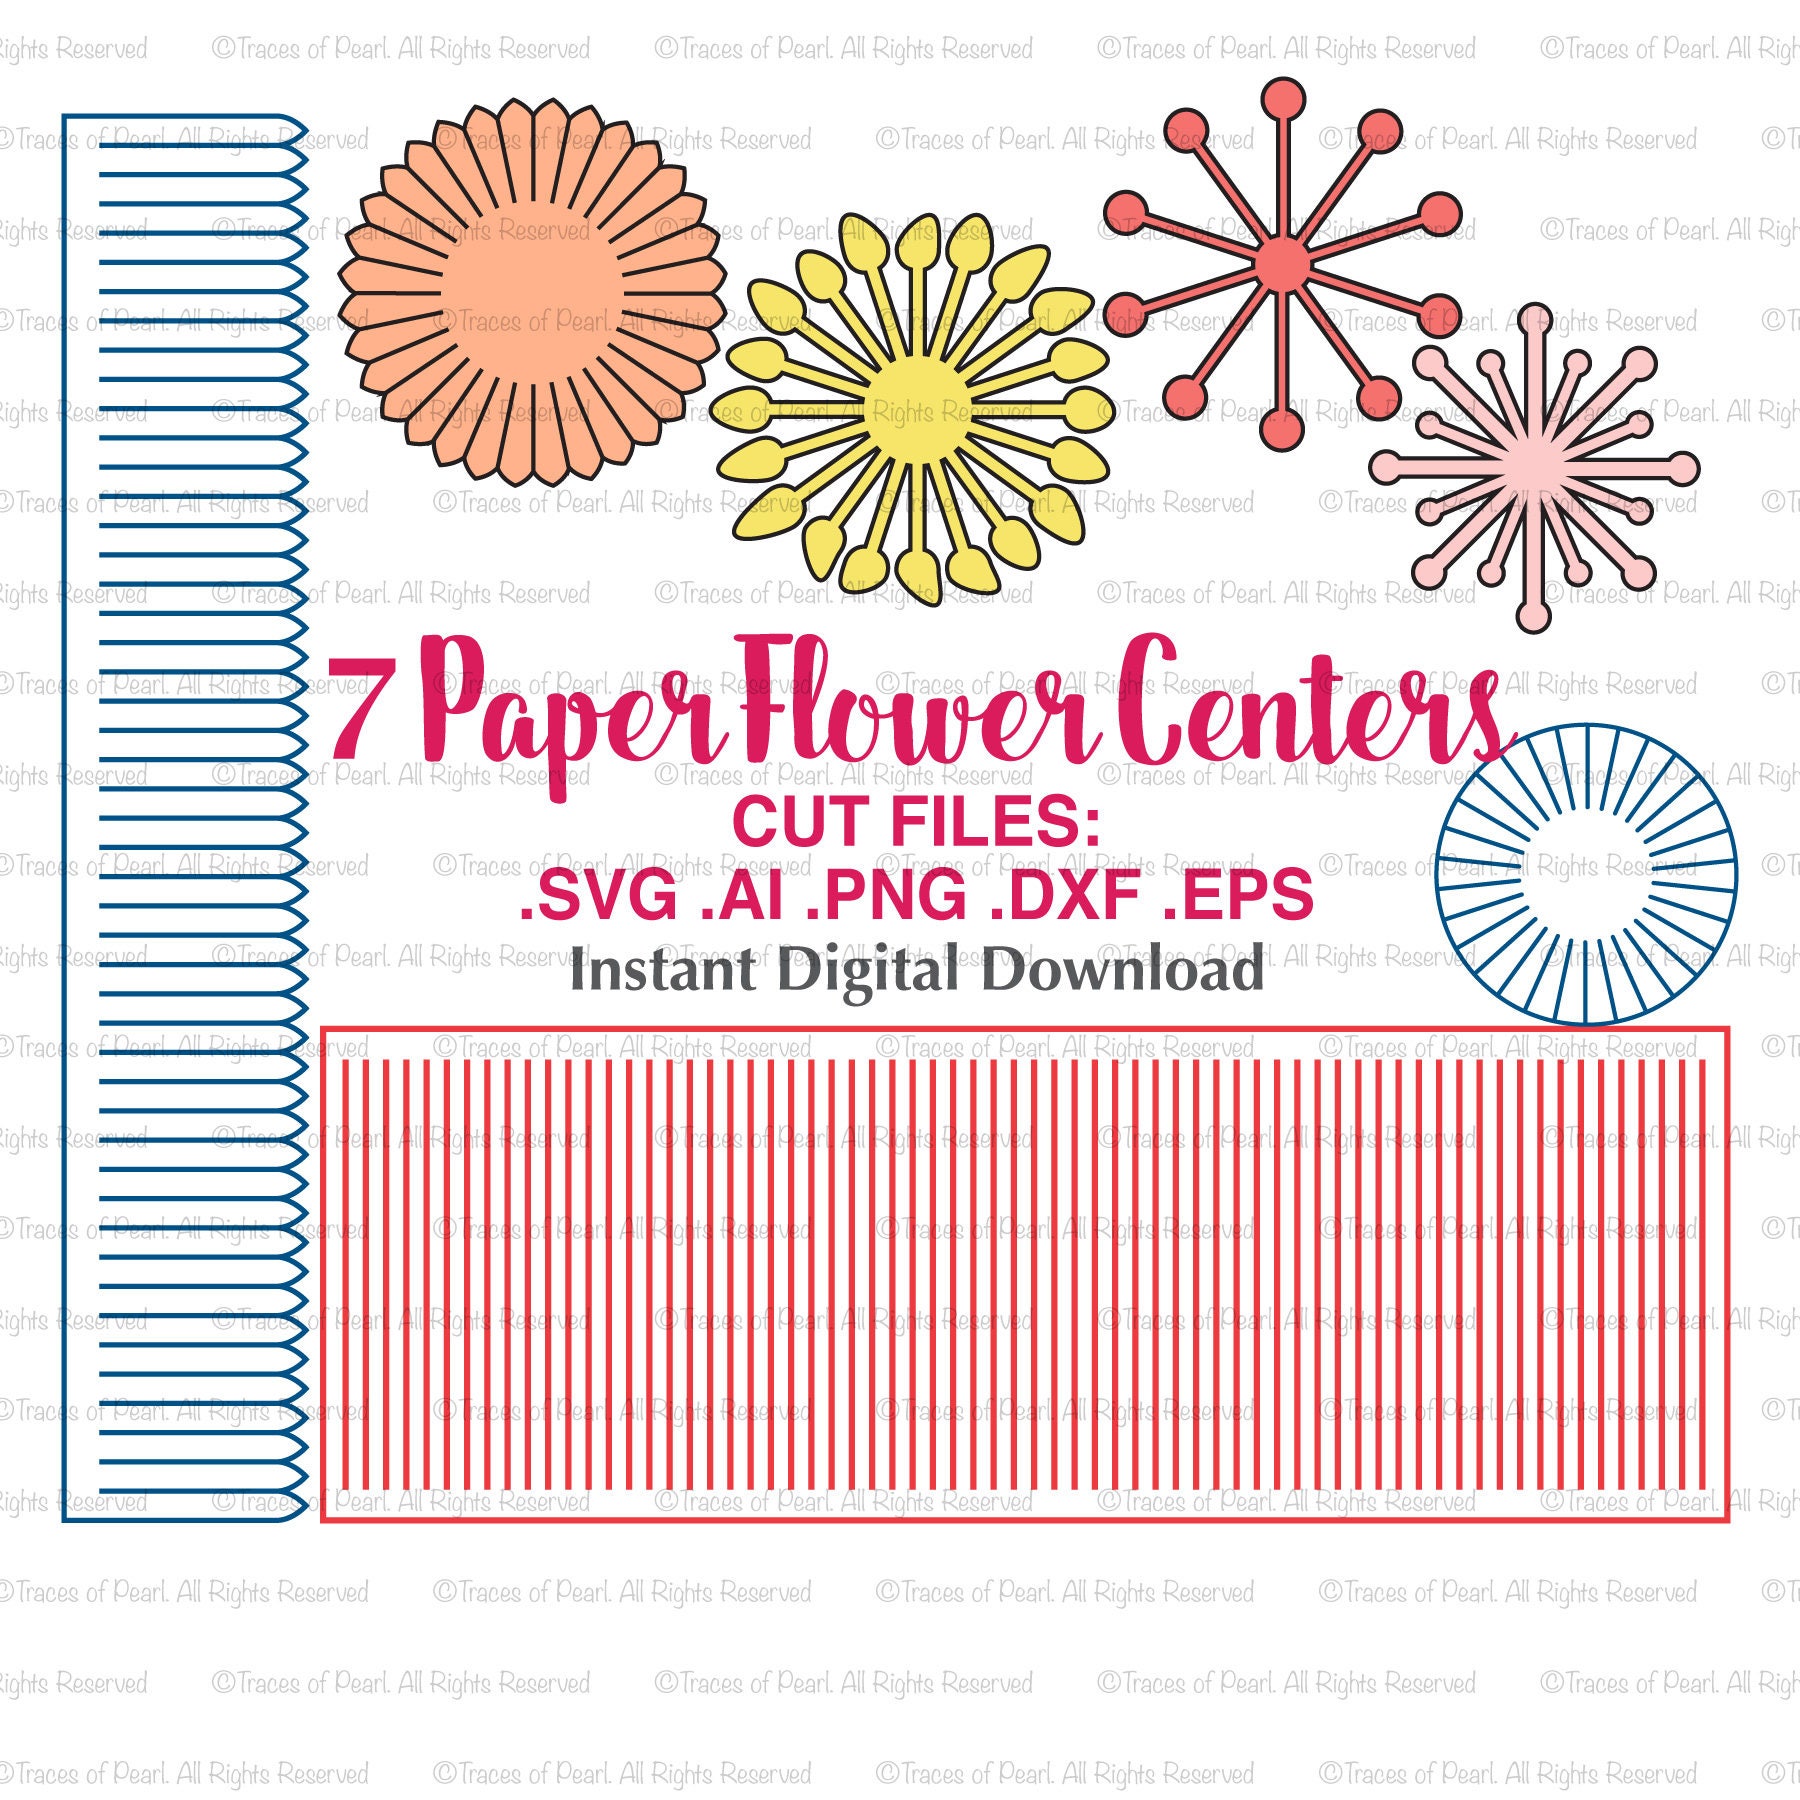 Download Paper Flower Centers SVG File Stamen cutting files for Paper